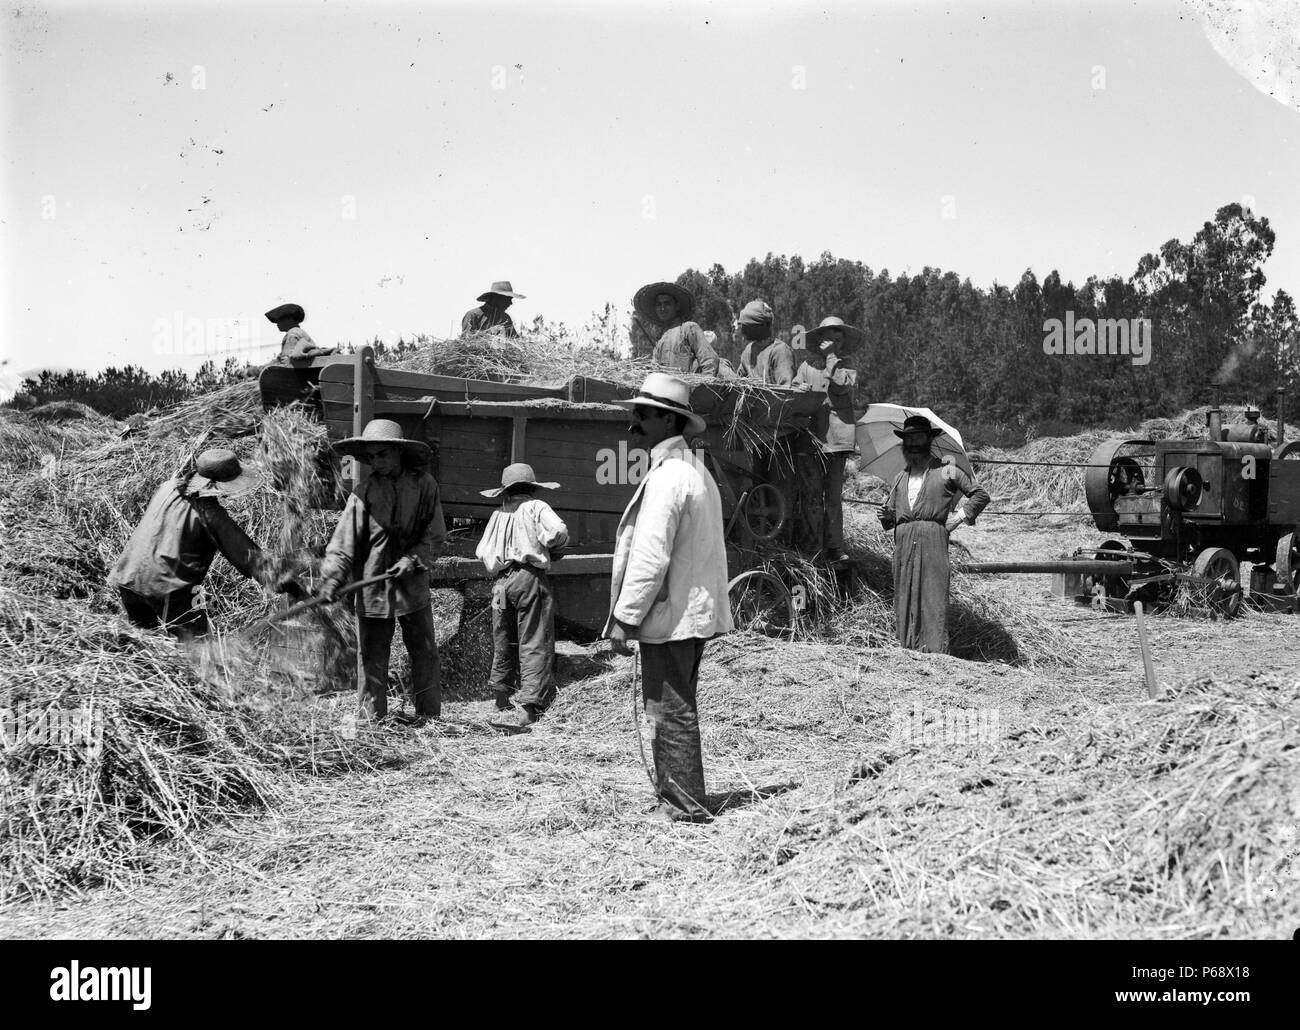 Photograph of an Israel agricultural school shows students harvesting hay. Stock Photo